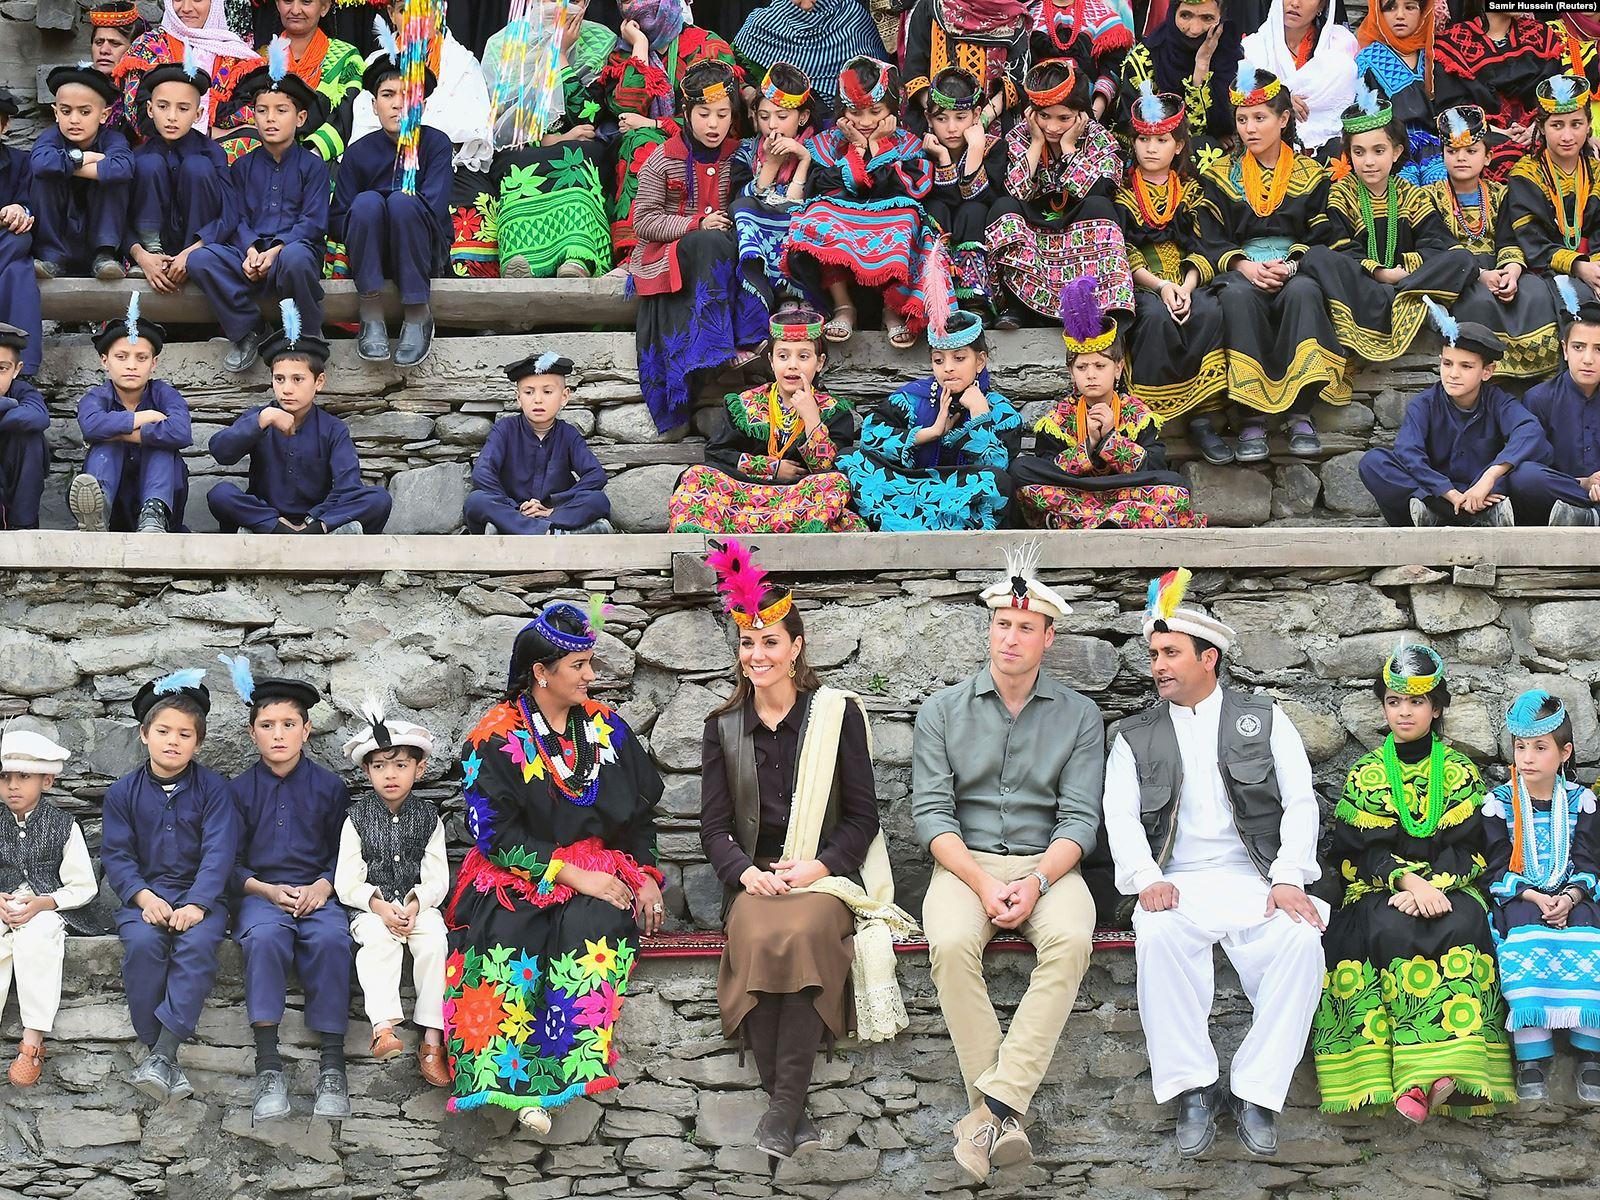 The royal pair wait for dancing to begin at a settlement of the Kalash people in the Chitral District.